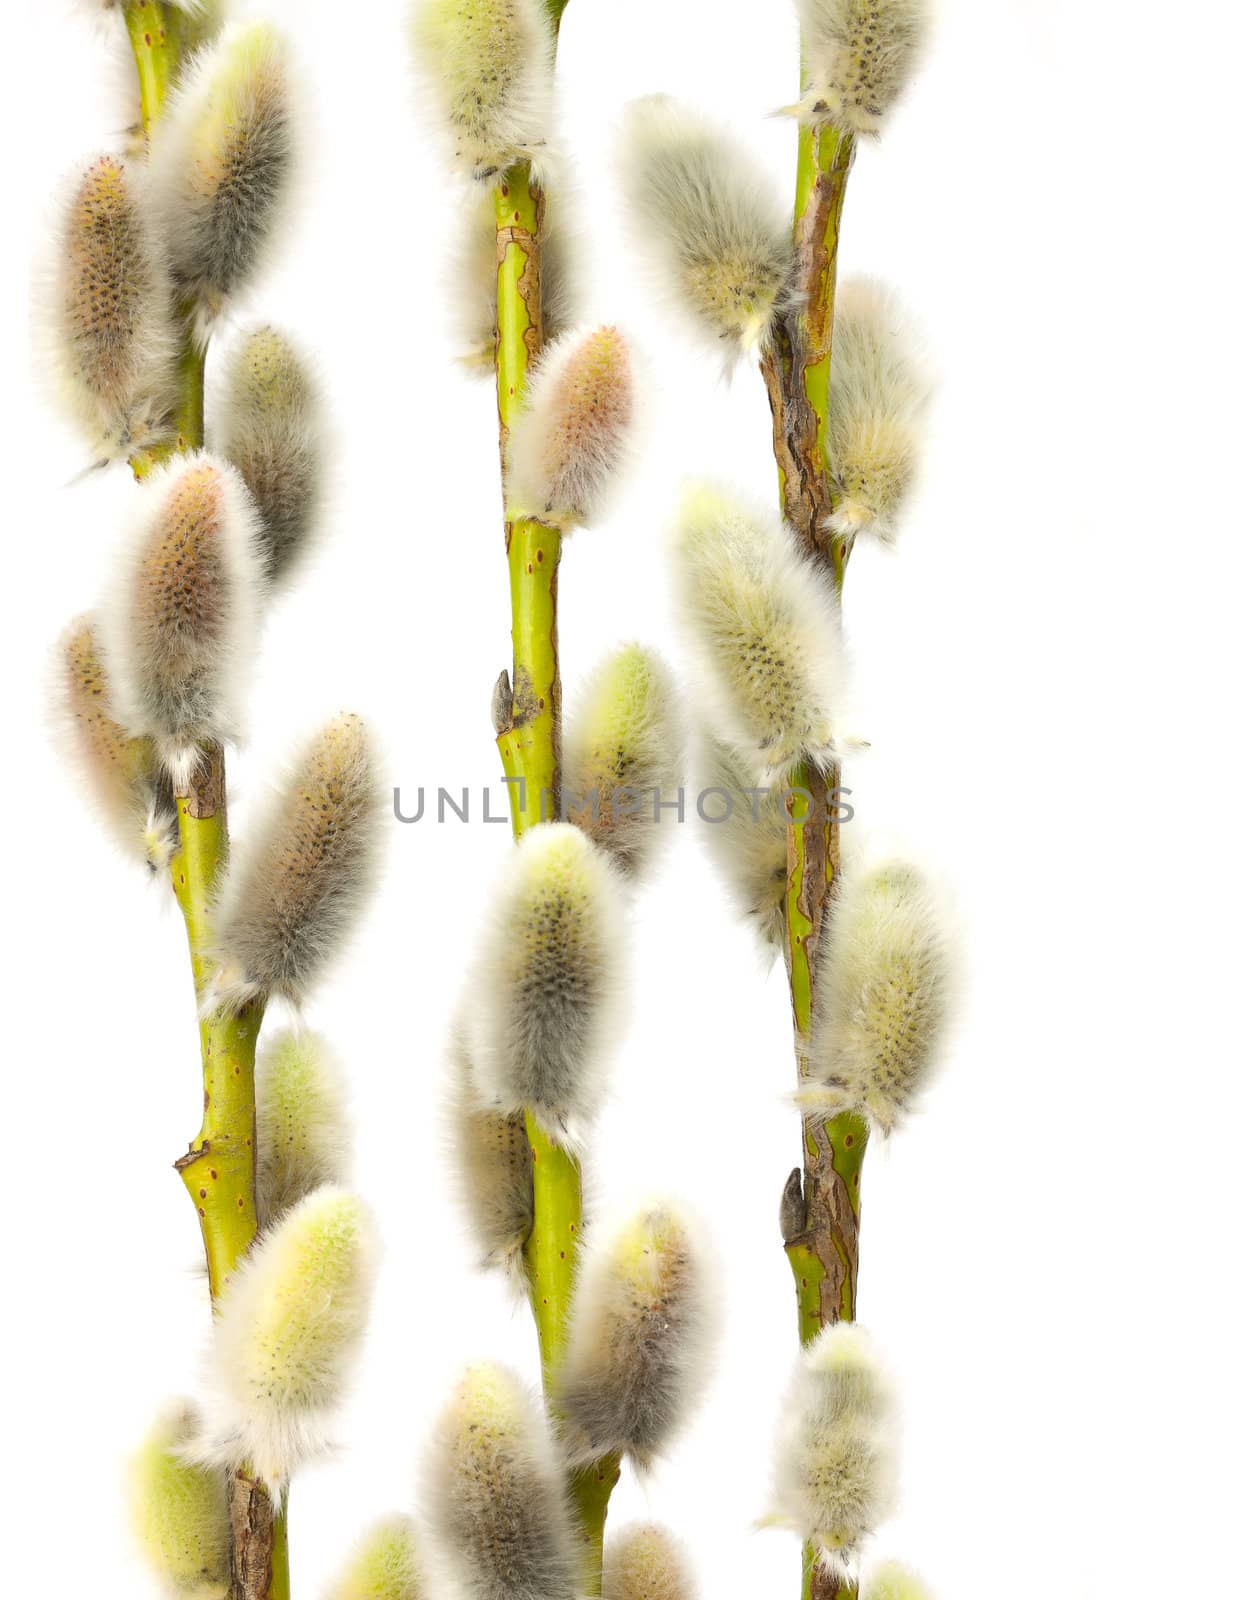 Willow flowers